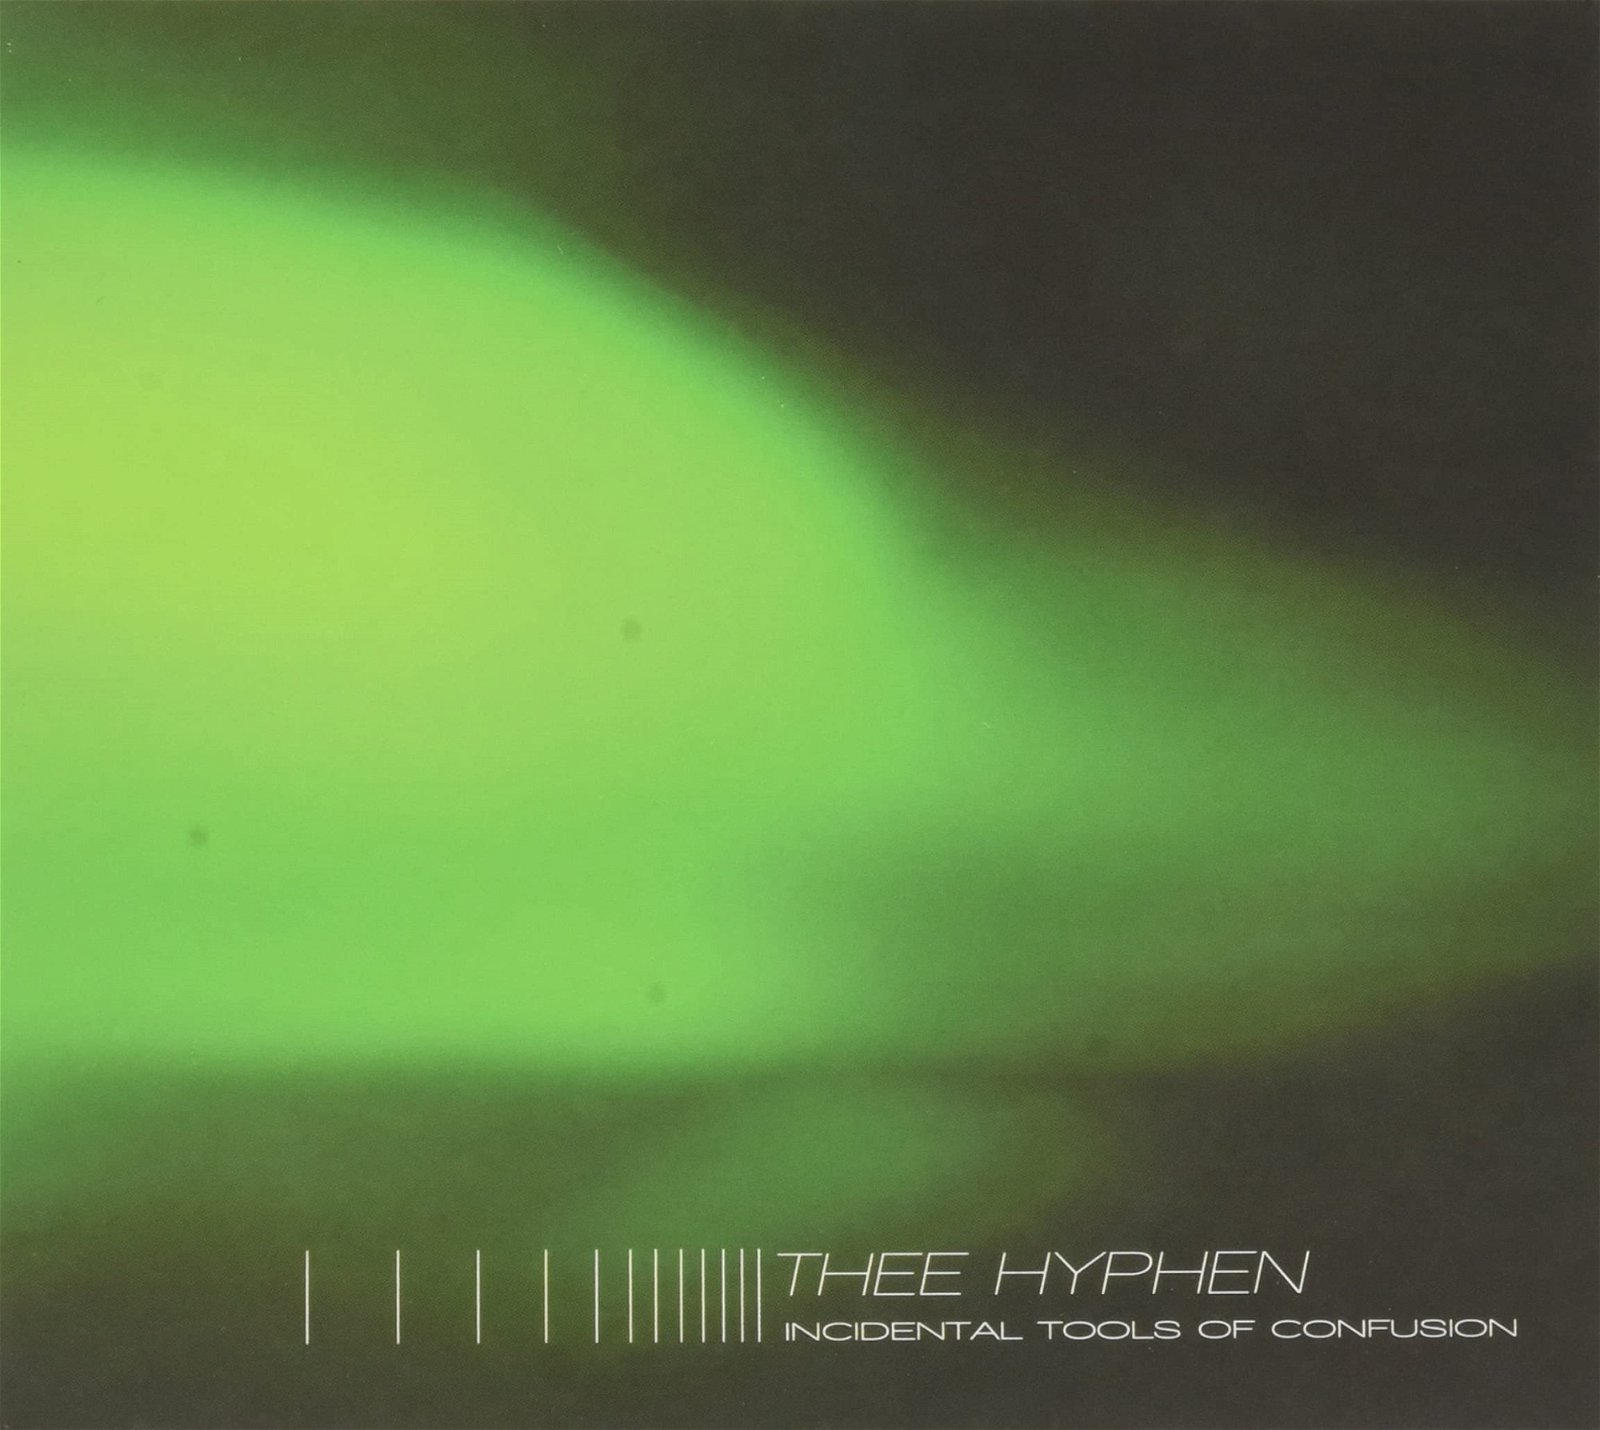 CD Shop - THEE HYPHEN INCIDENTAL TOOLS OF CONFUSION